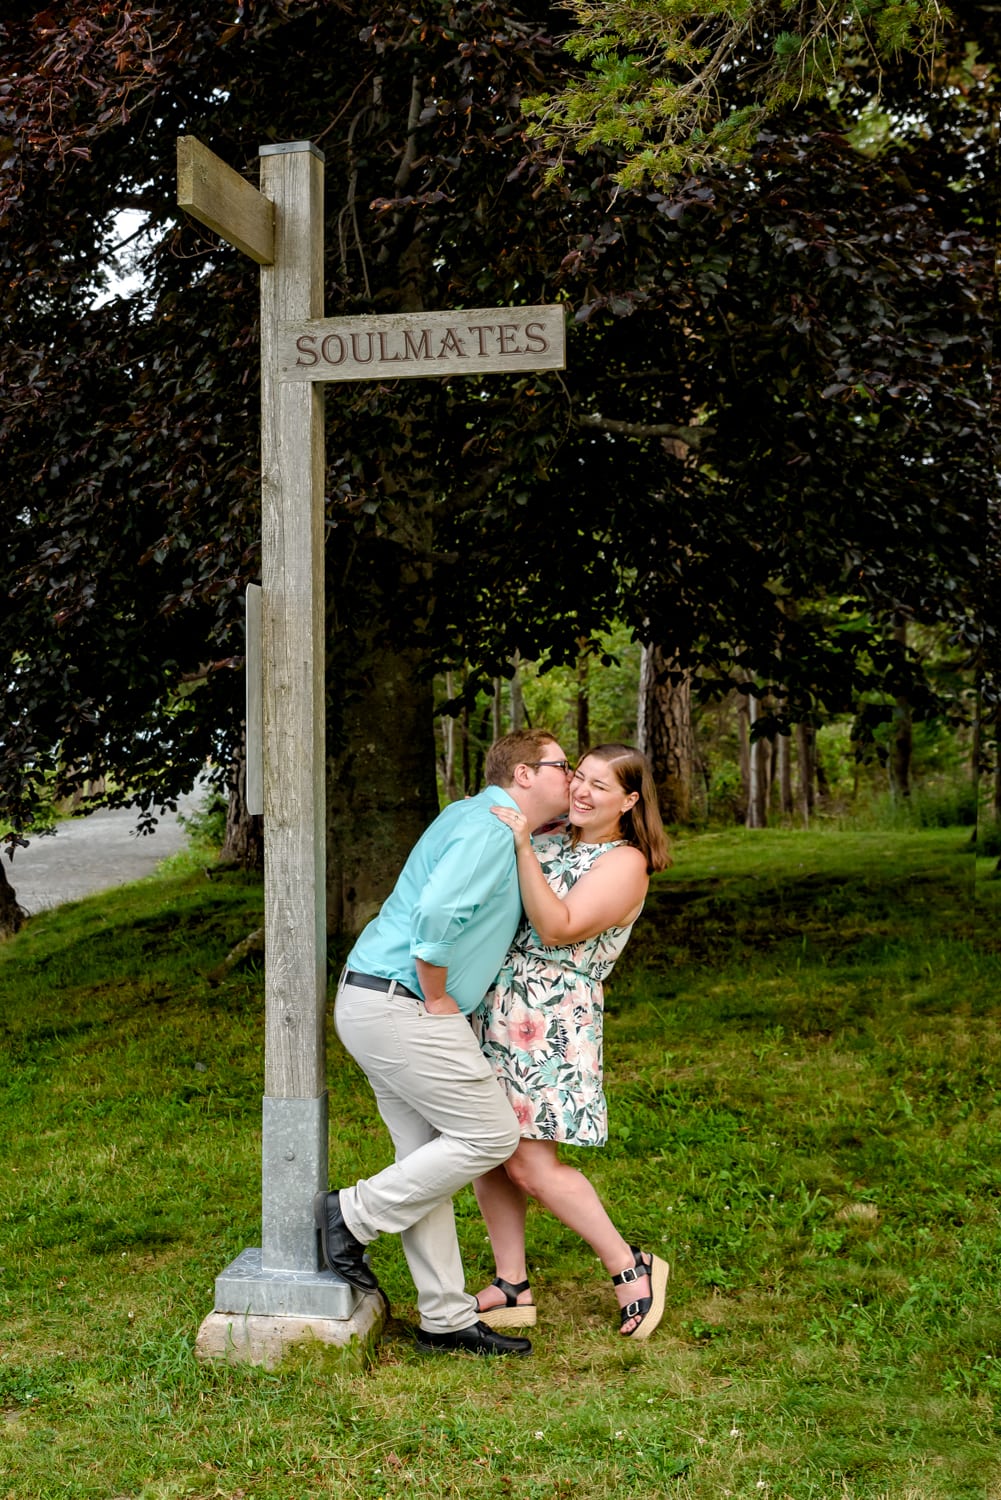 A newly engaged couple laugh and play under a soulmates street sign at the Point Pleasant Park in Halifax, NS.